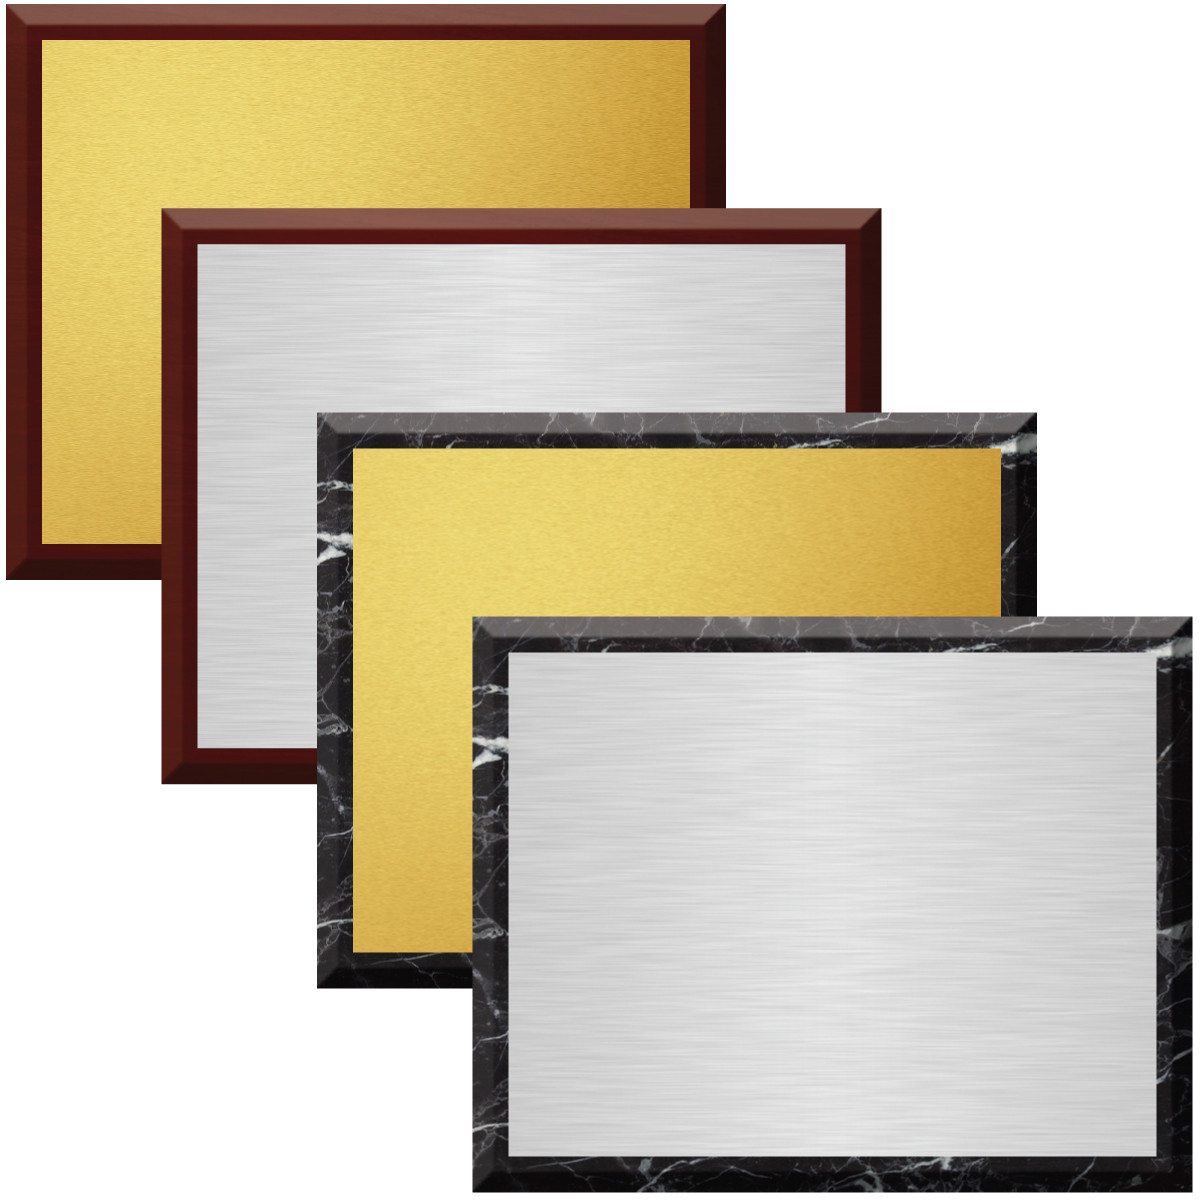 Sublimated Plaques - Color Metal Award 8" x 10"